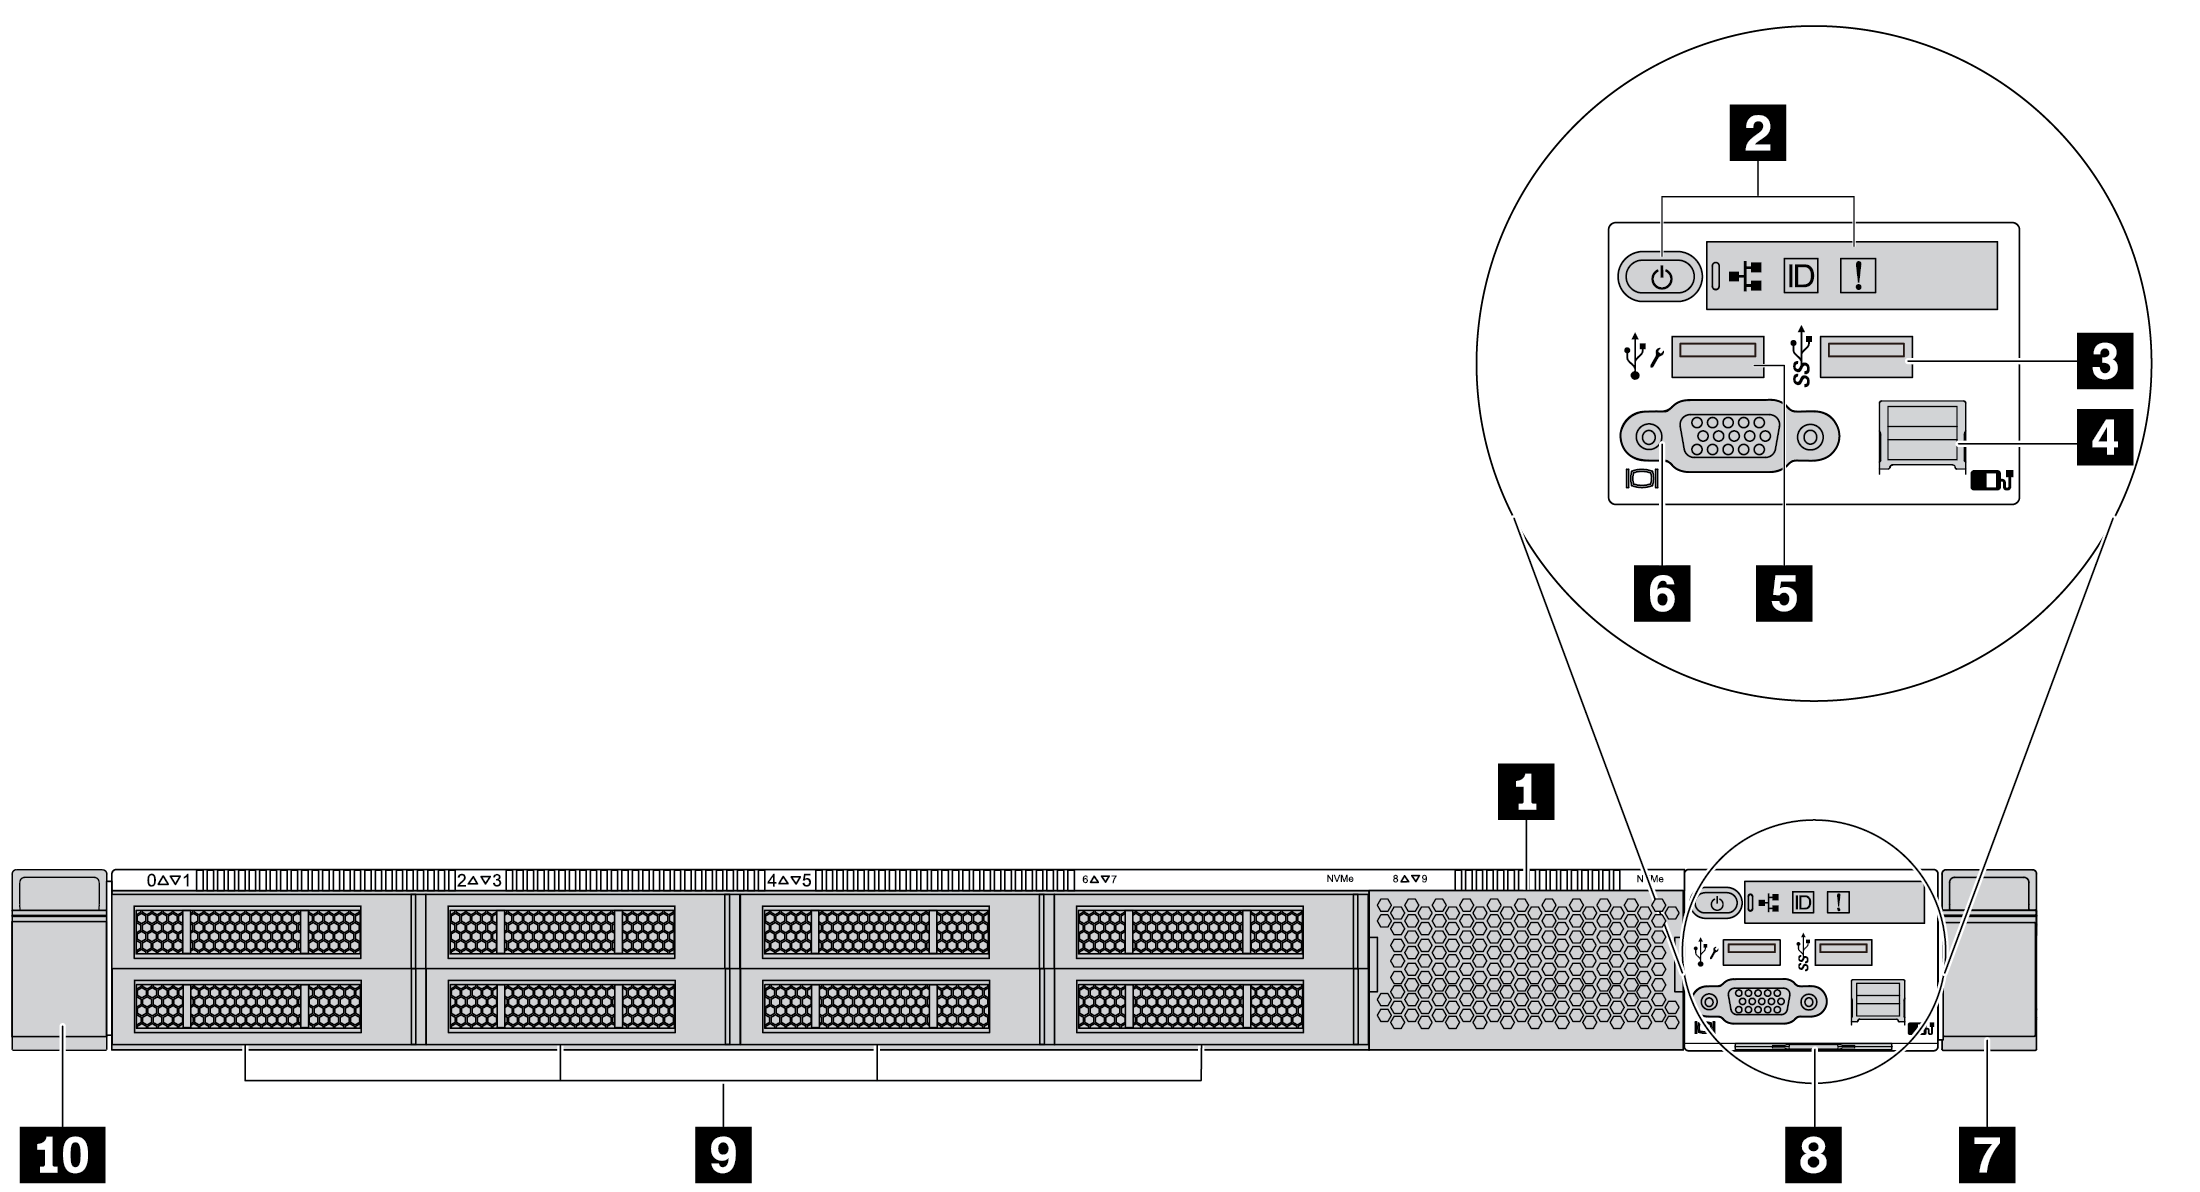 Front view of server model without a backplane (for eight 2.5-inch drive bays)